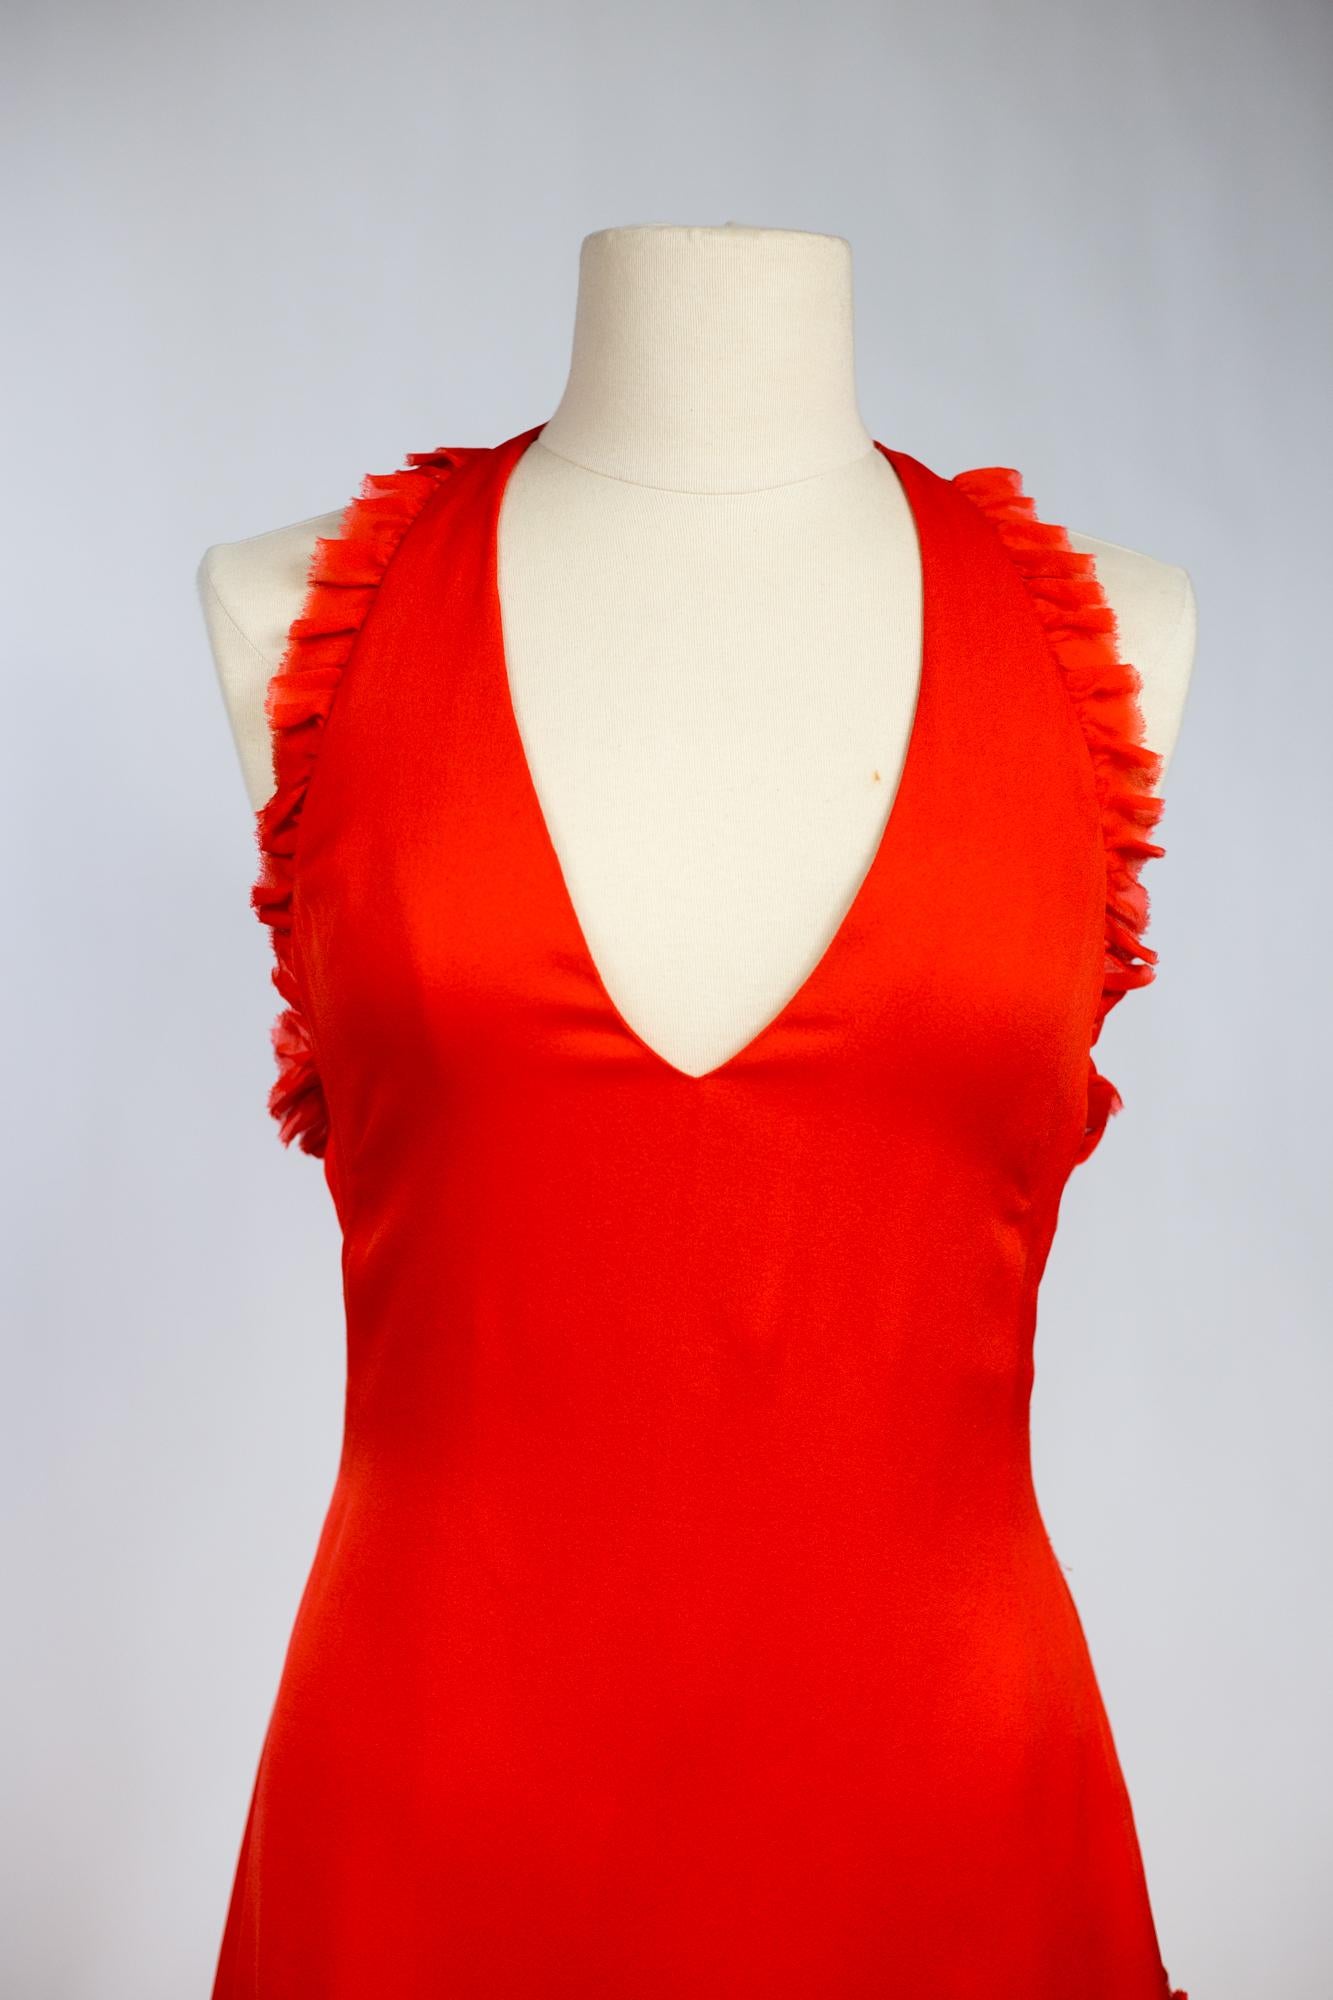 A Thierry Mugler Couture Evening Dress in Coral Silk Crepe Circa 1997/2002 For Sale 3